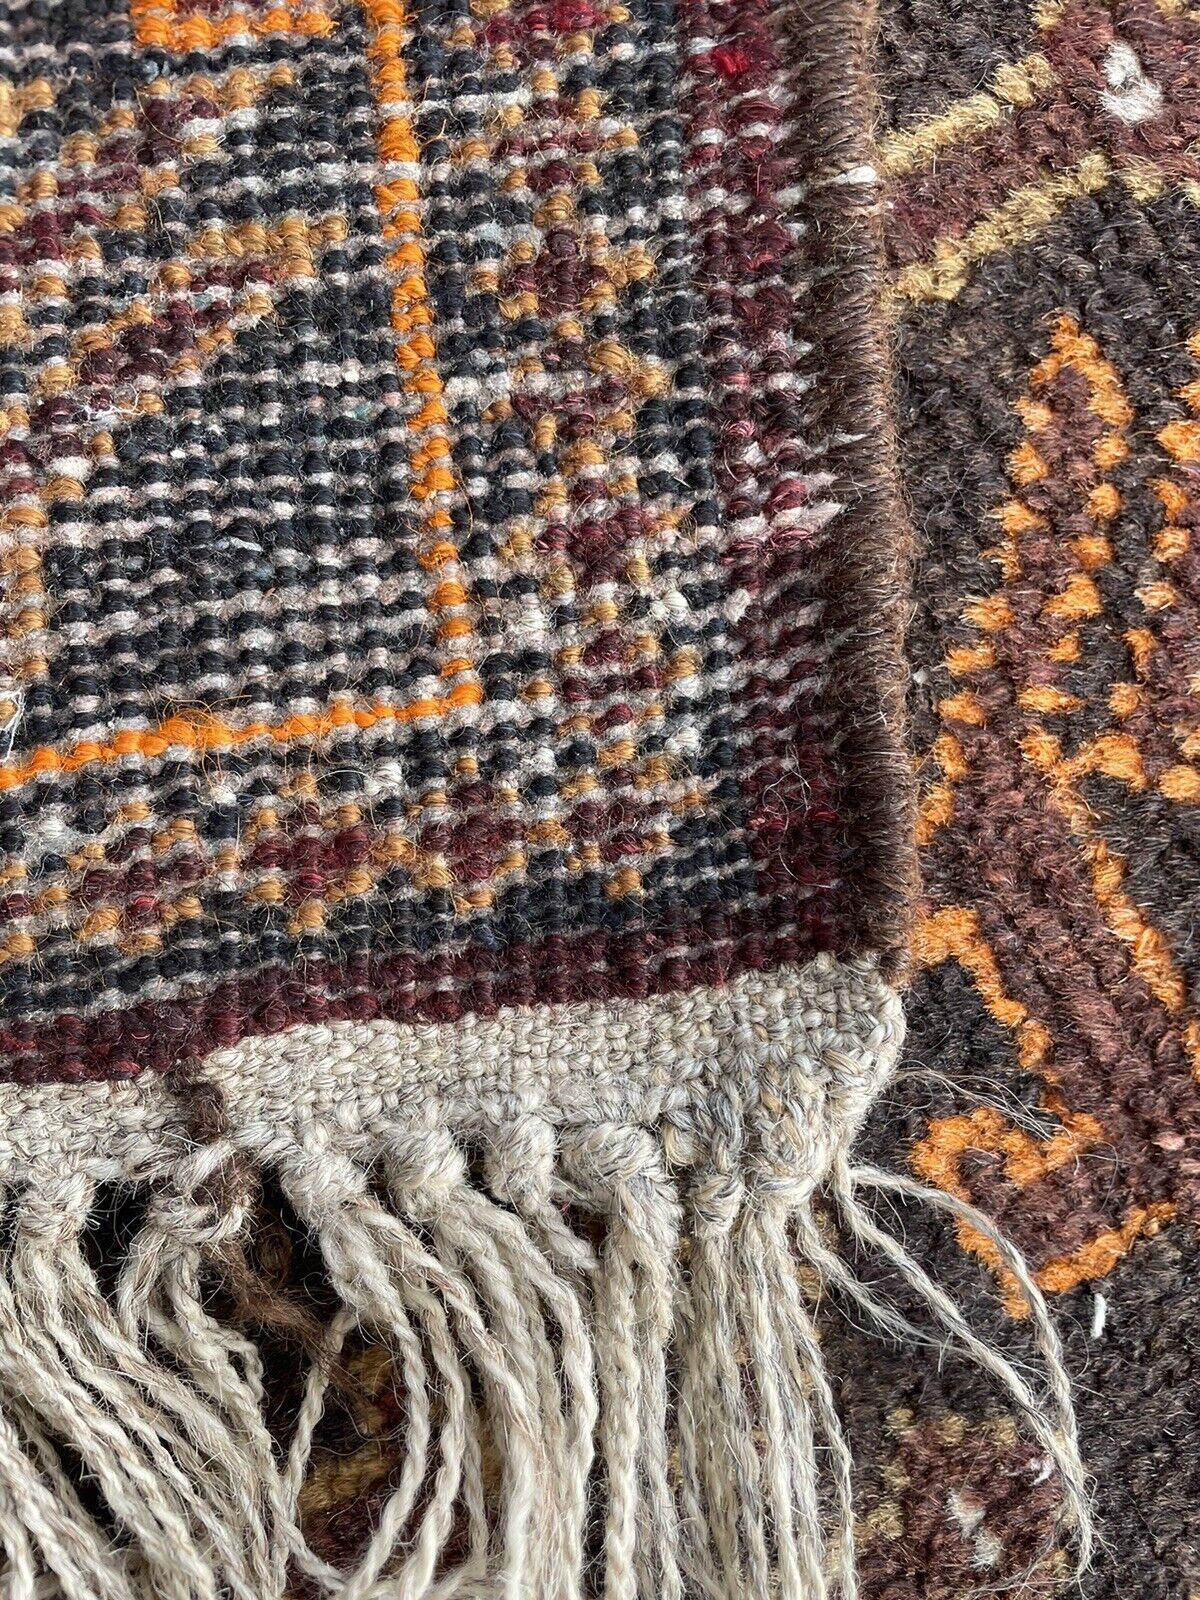 Back side of the Handmade Vintage Afghan Baluch Collectible Rug - Underside view revealing the rug's construction and material.